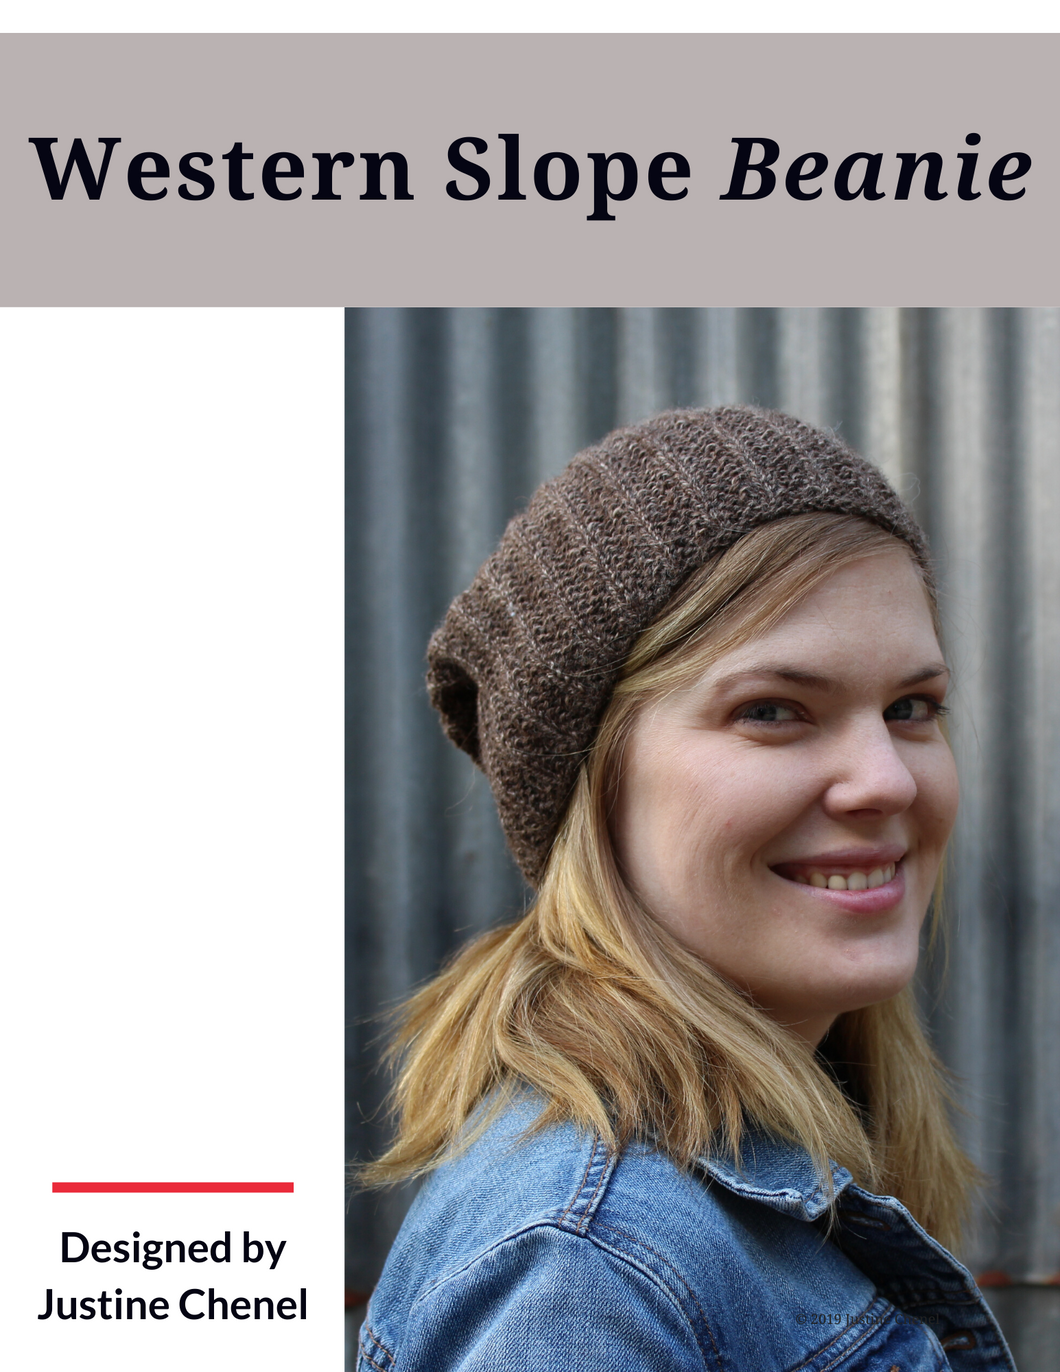 Western Slope Beanie (Hard copy with Ravelry download code)